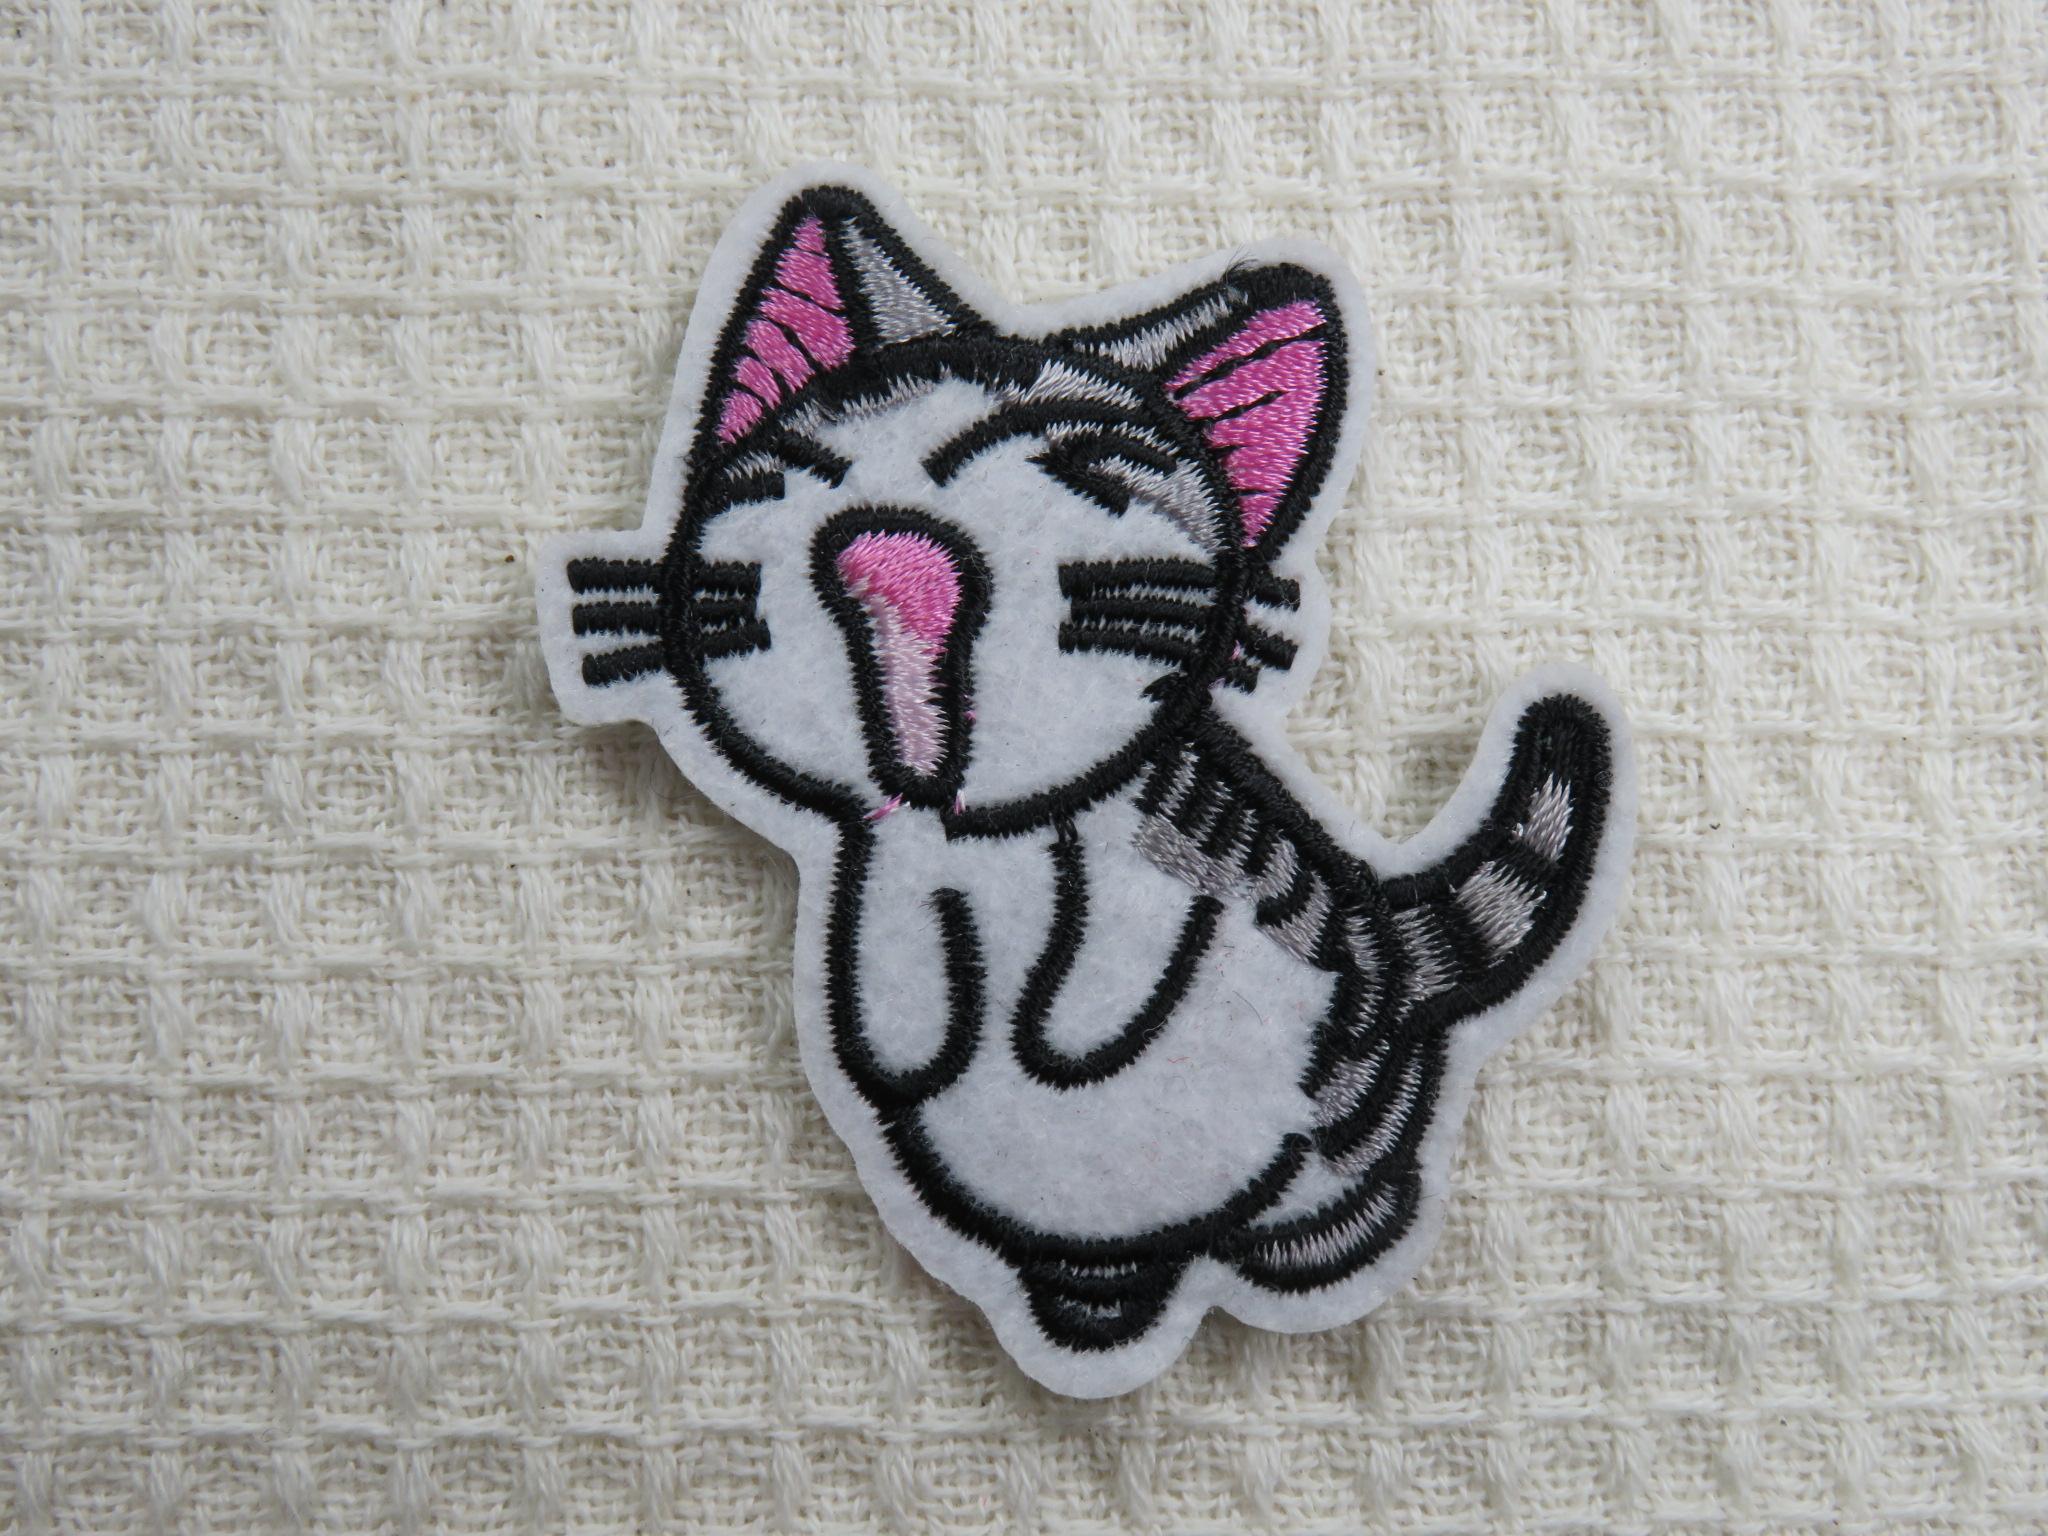 Patch chat manga kawaii thermocollant écusson chat brodé